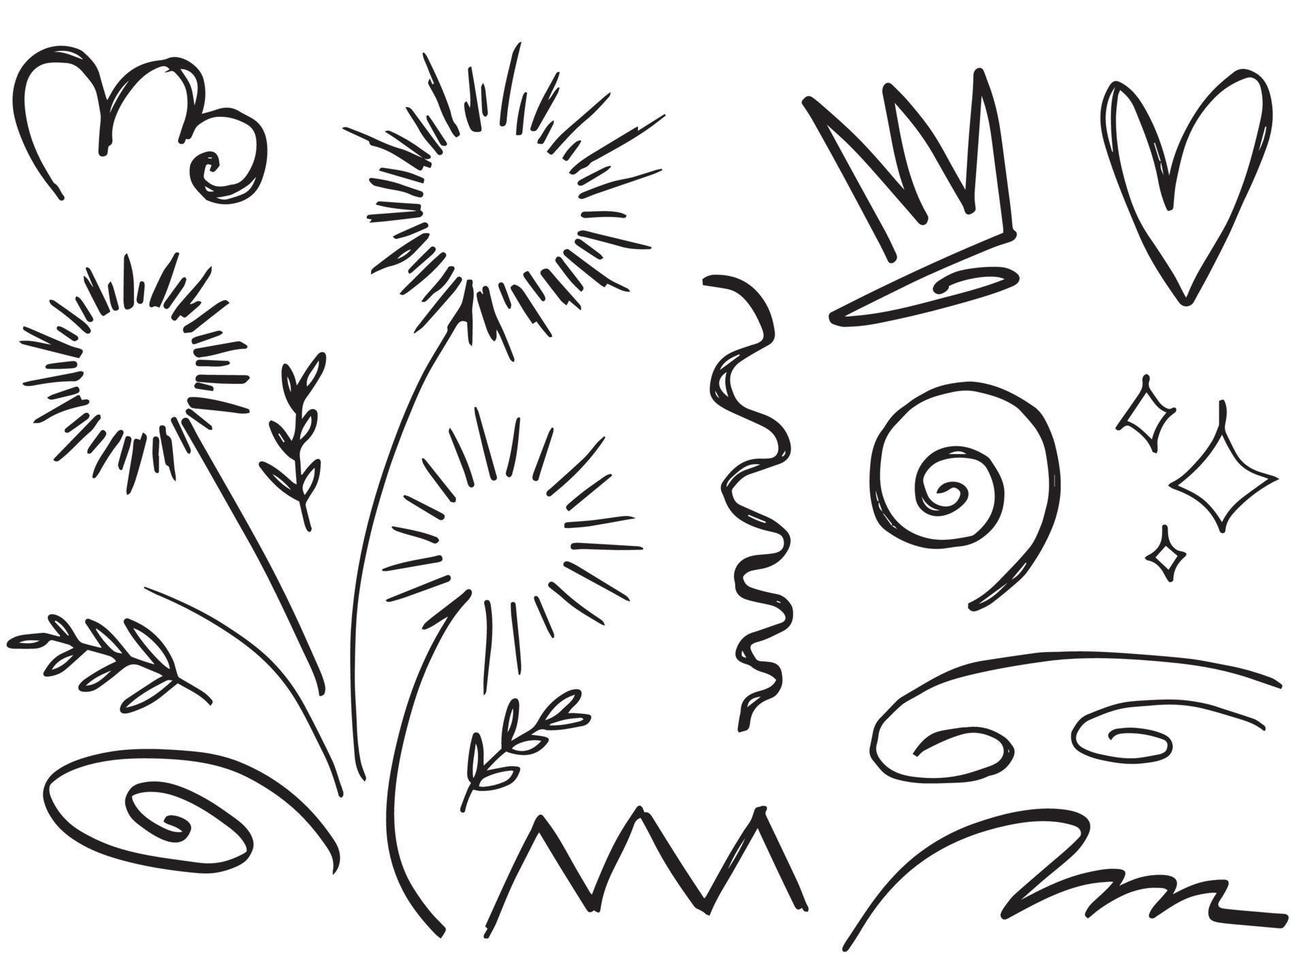 Abstract arrows, ribbons, crowns, hearts, explosions and other elements in hand drawn style for concept design. Doodle illustration. Vector template for decoration